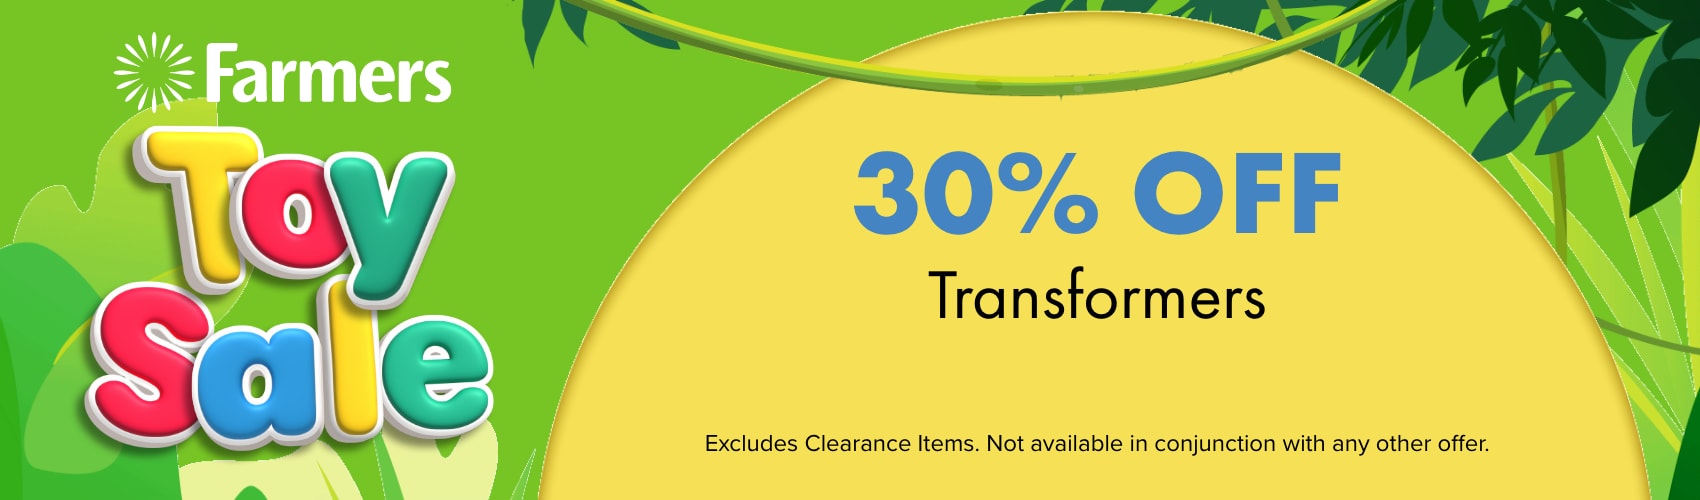 30% OFF Transformers